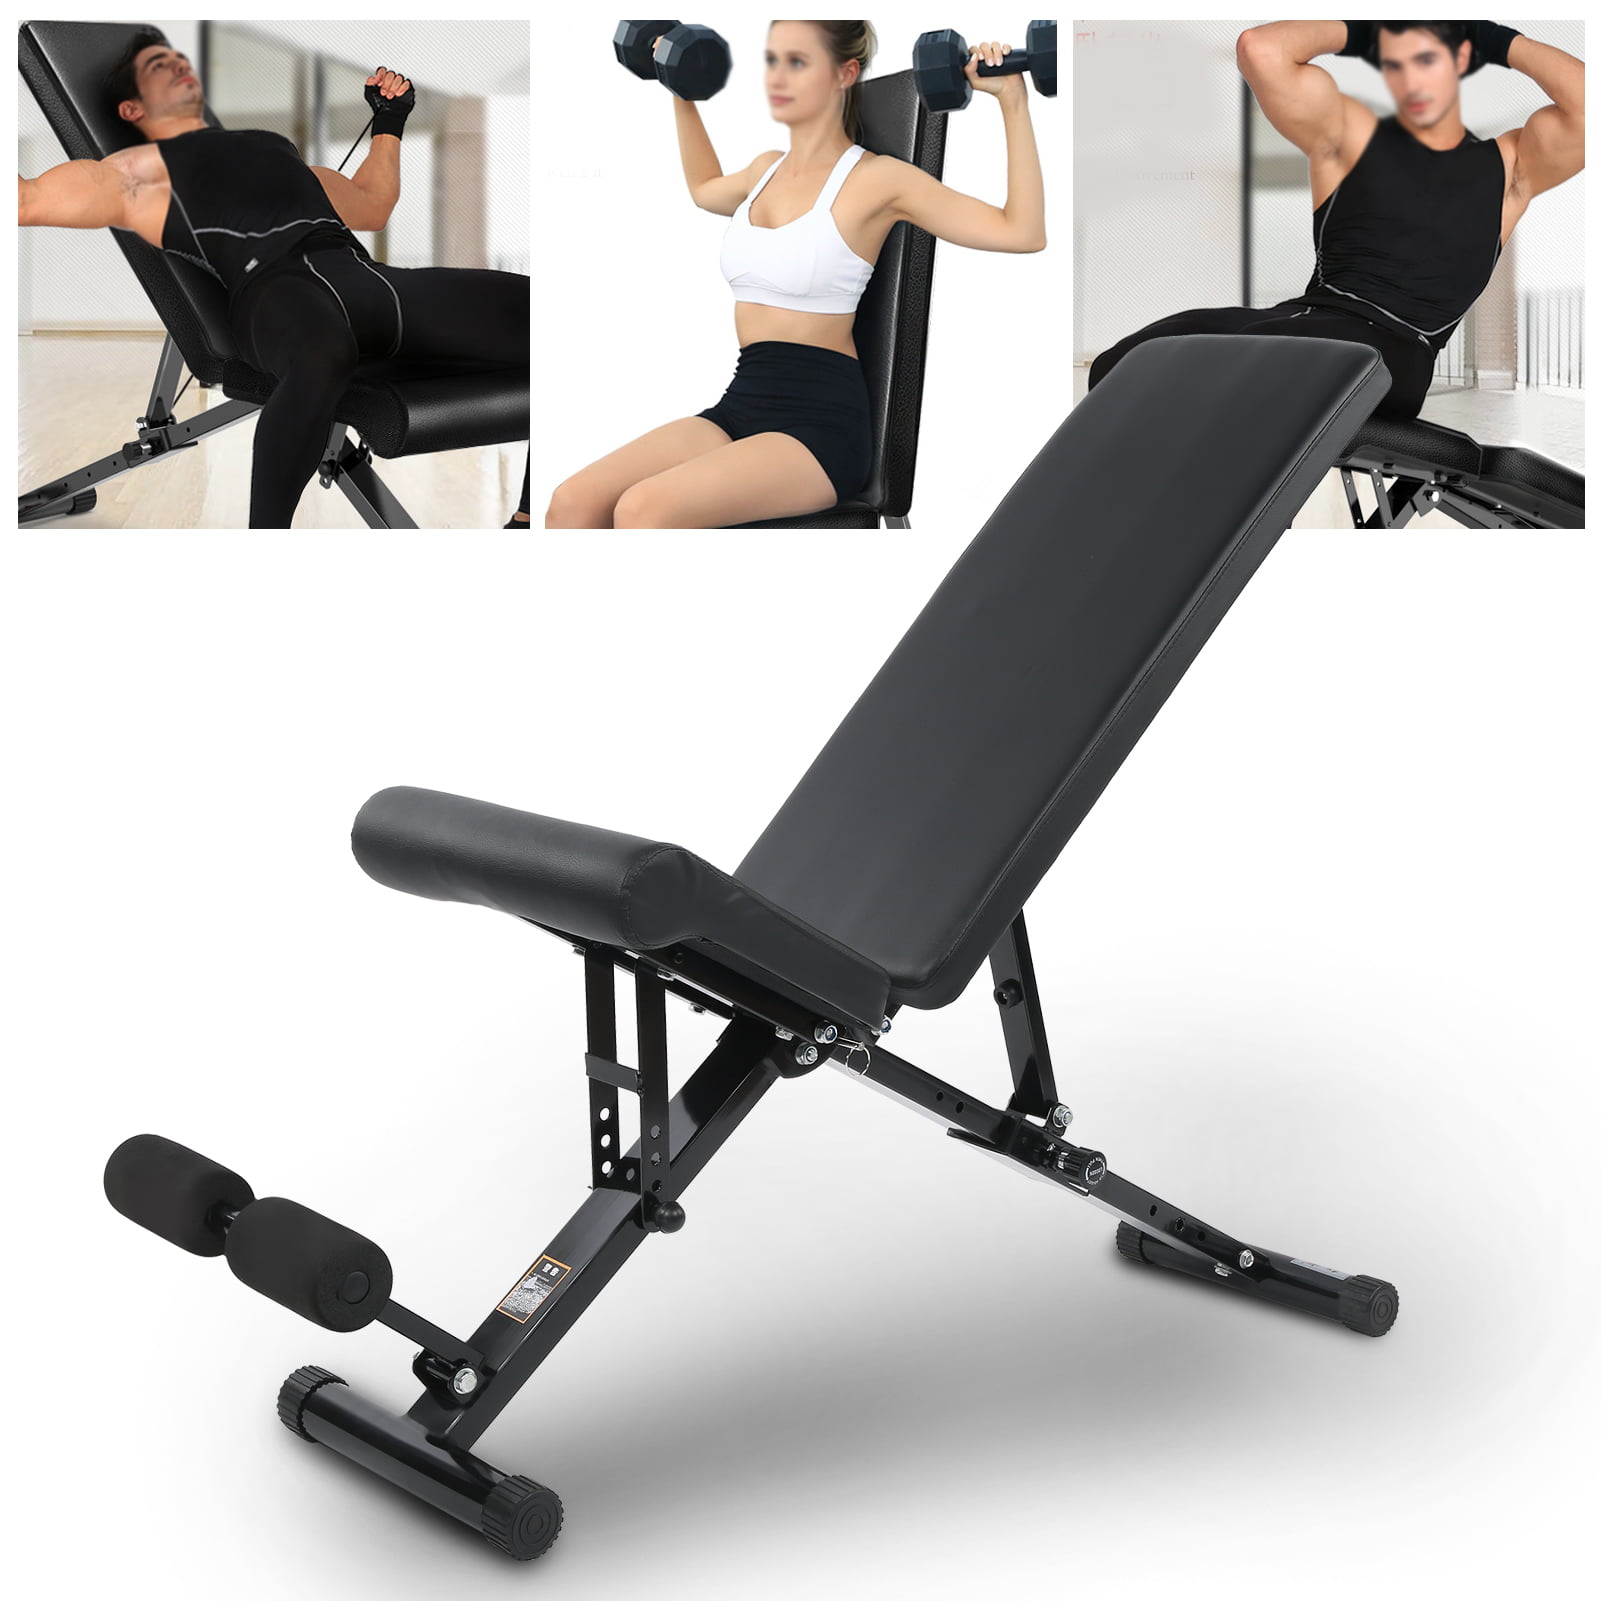 Adjustable Weight Bench Decline Incline Foldable Body Workout Gym Exercise Lot 